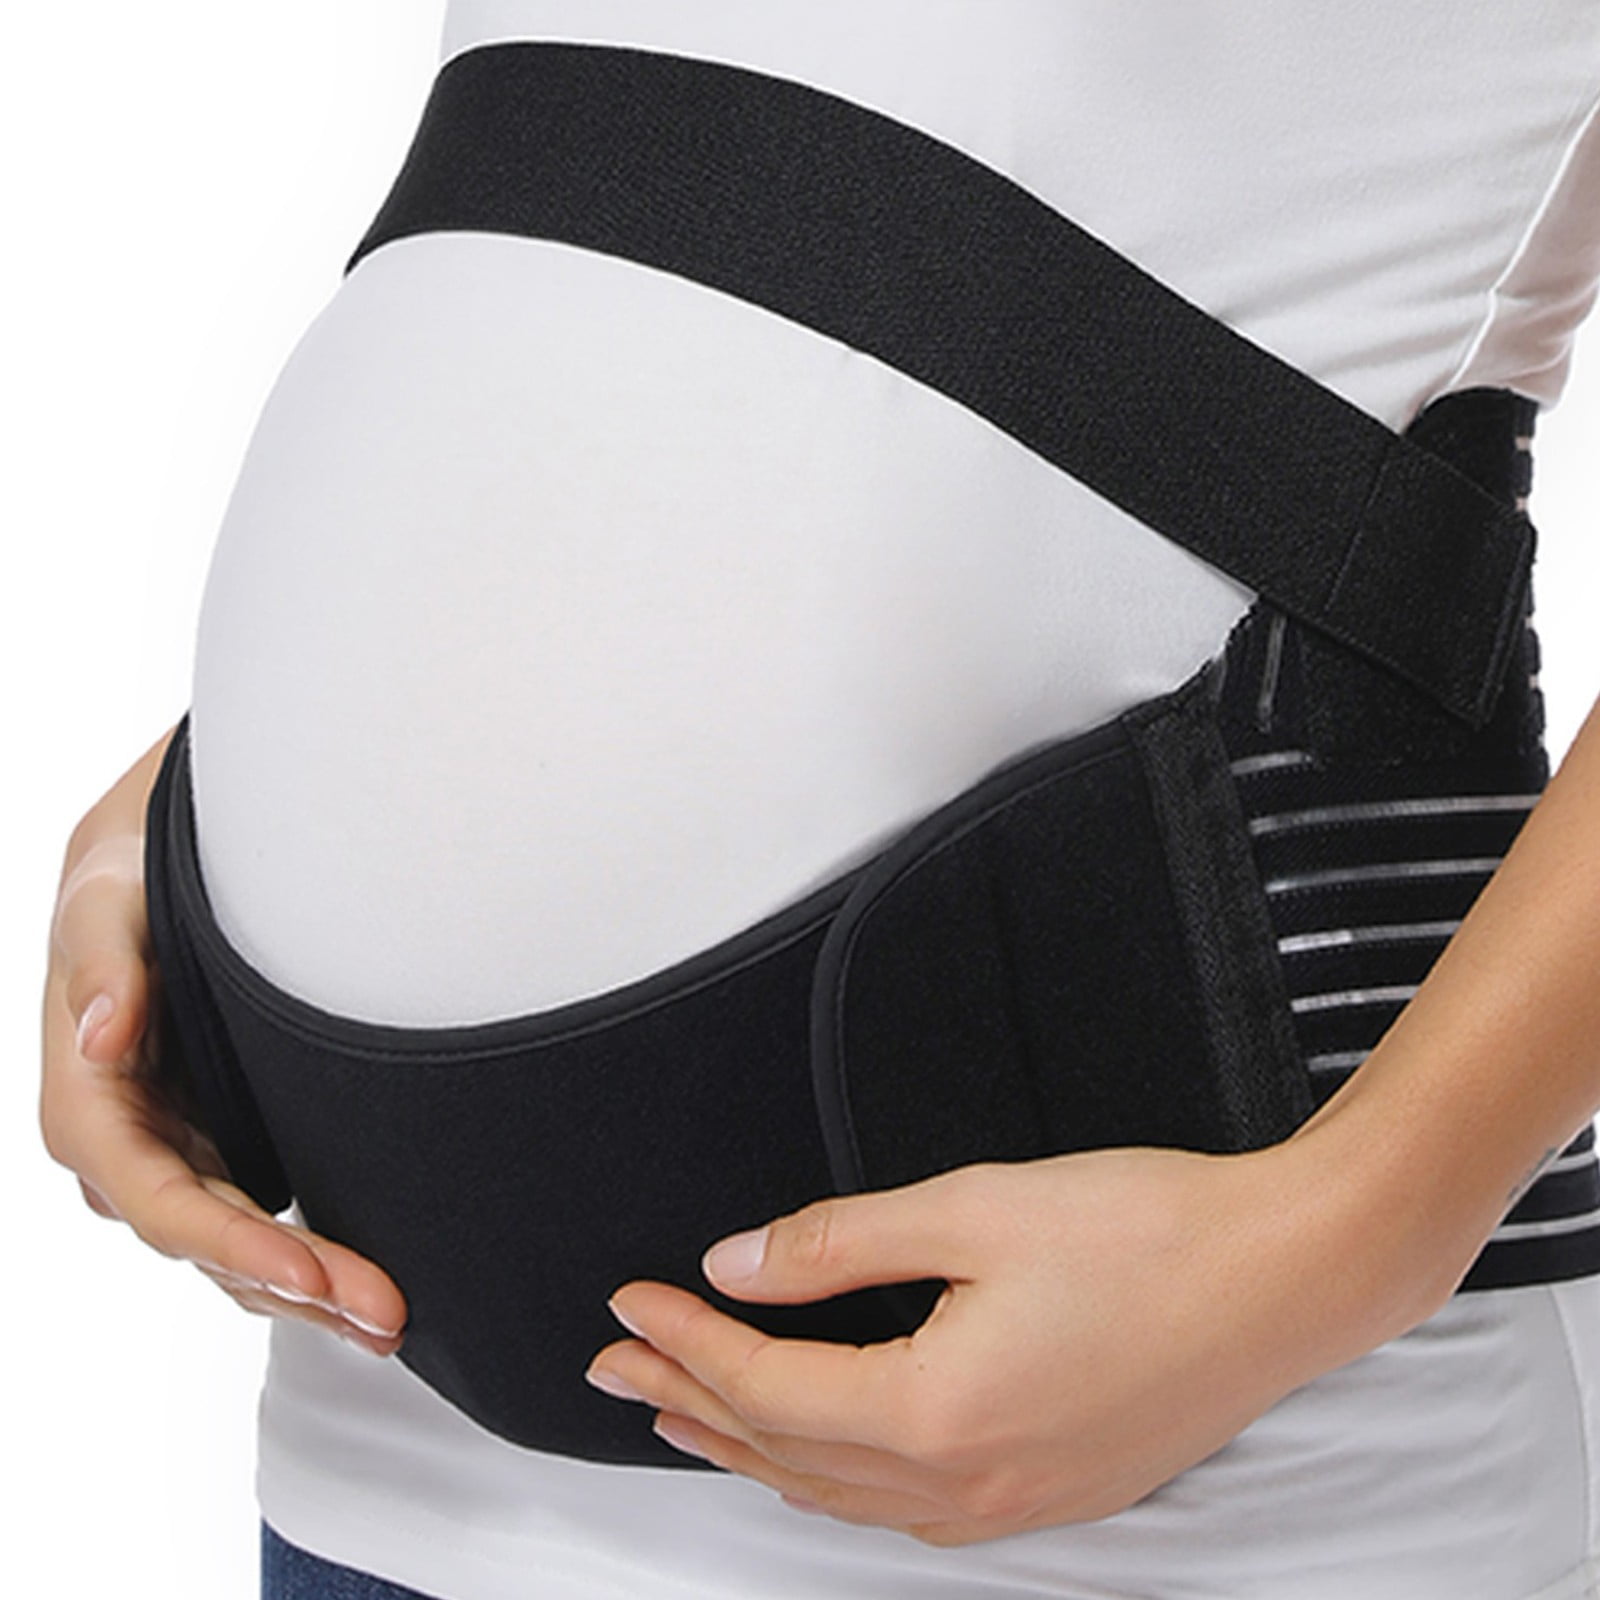 CFR Maternity Pregnancy Support Belly Band Prenatal Postpartum Recovery Belts 